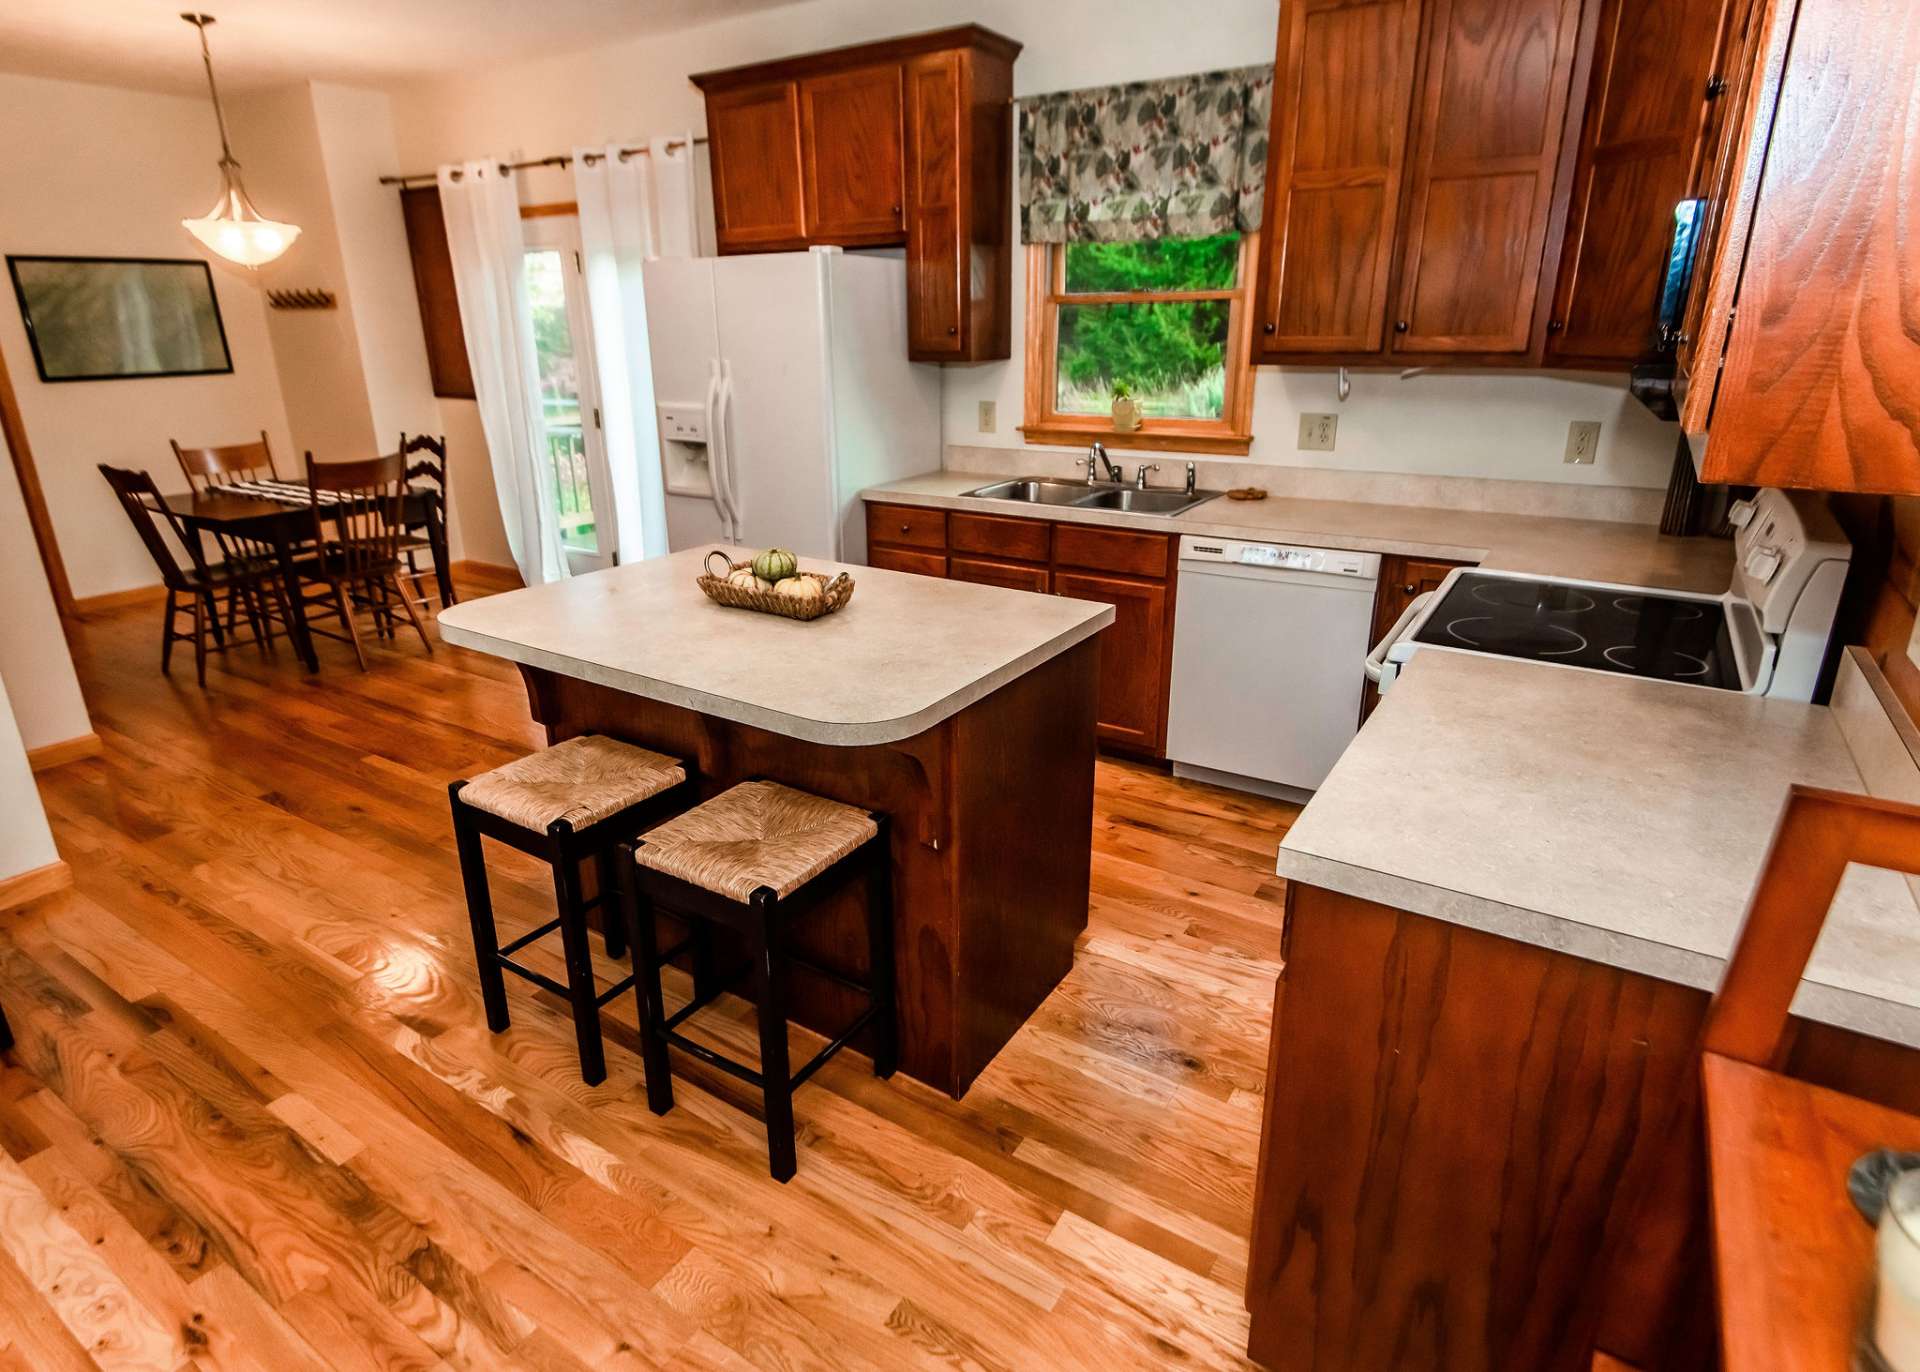 The kitchen offers ample work and storage space that includes a bar with seating.